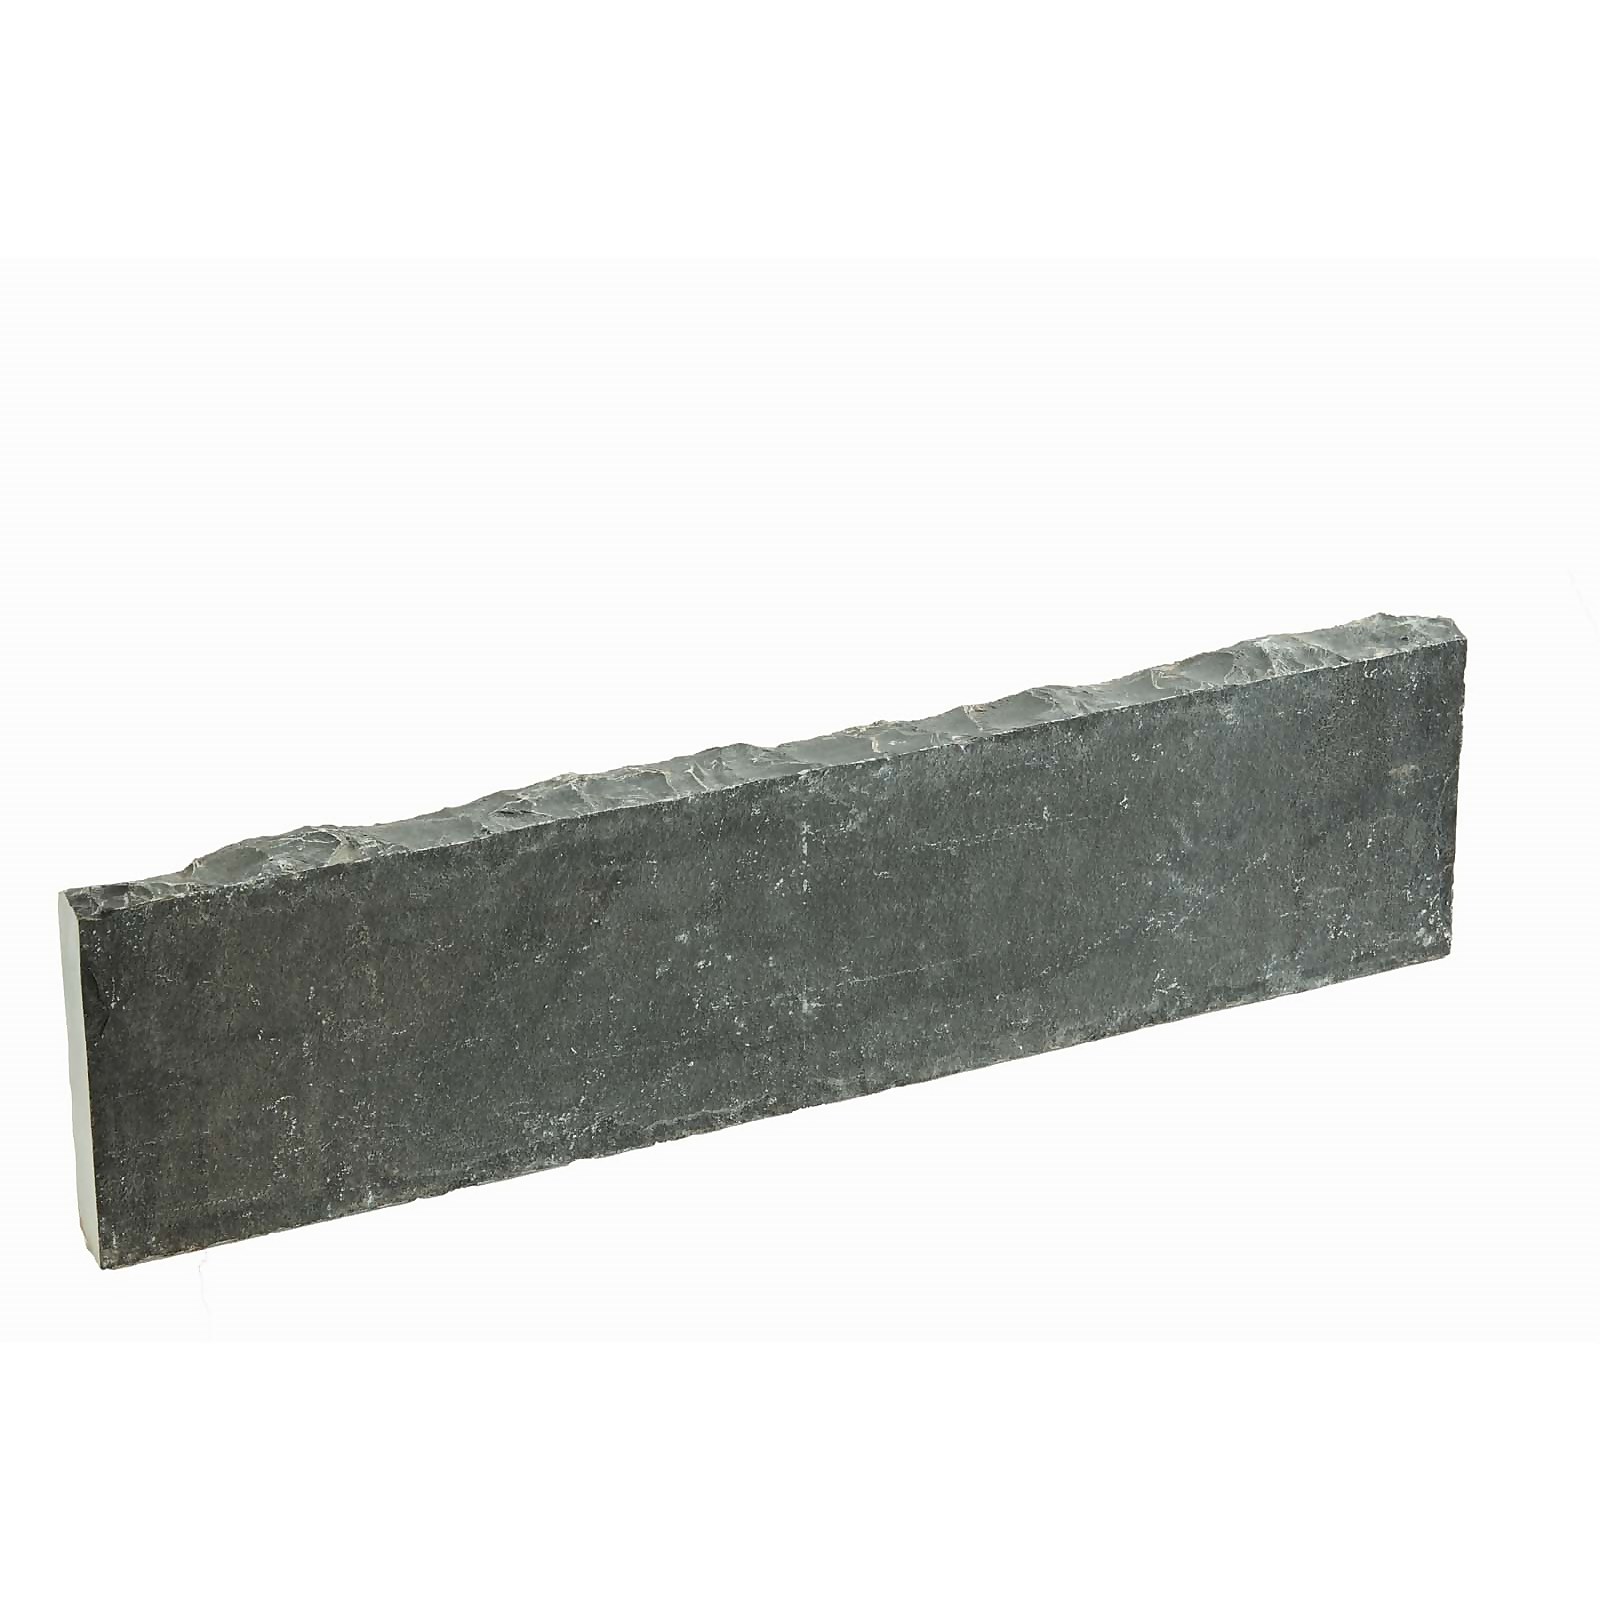 Photo of Stylish Stone Natural Stone Coping/edging - Charcoal -full Pack-